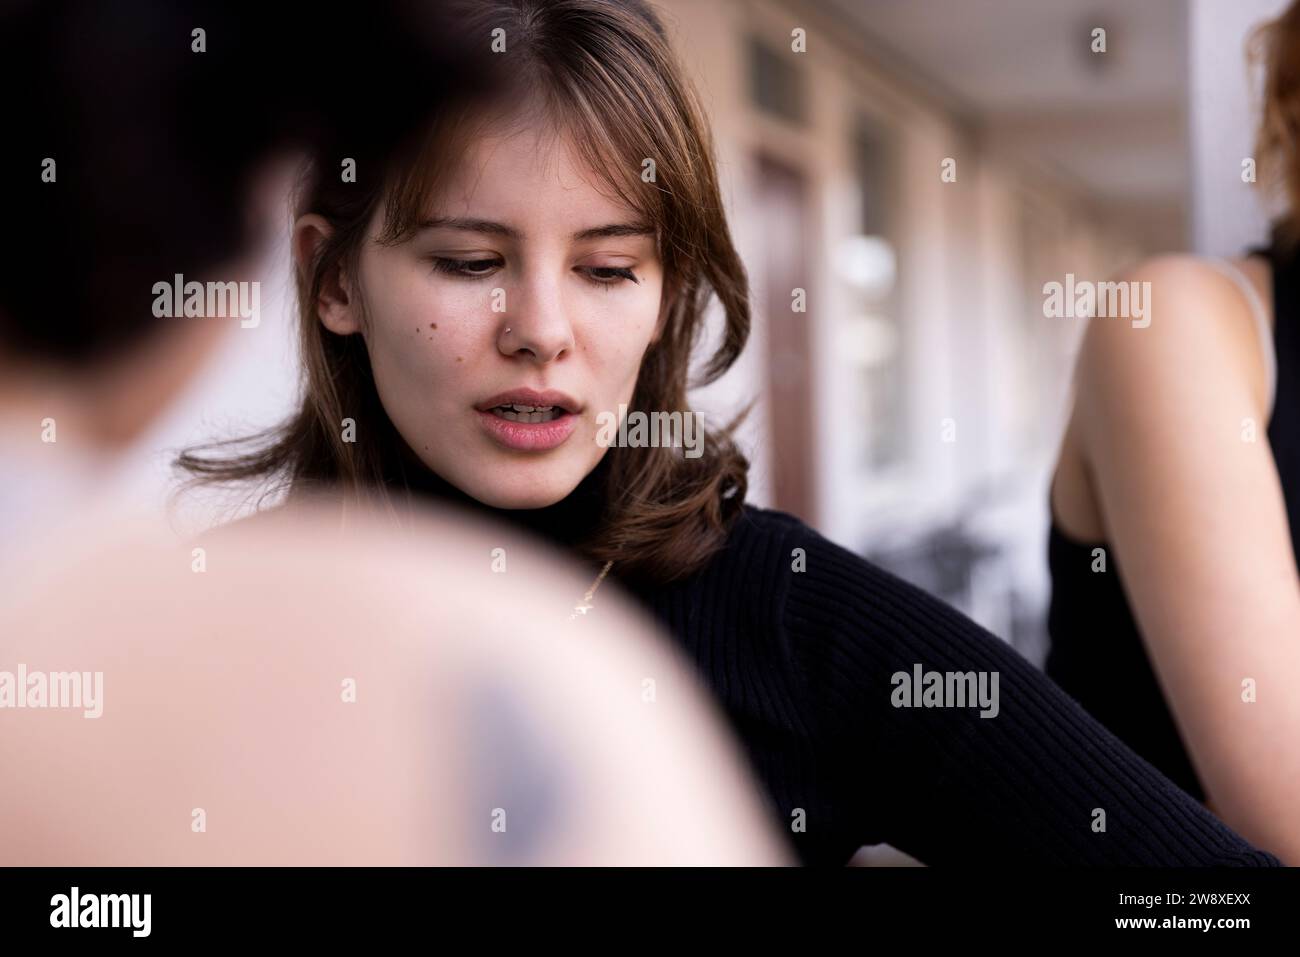 Young woman looking down with friend in balcony Stock Photo